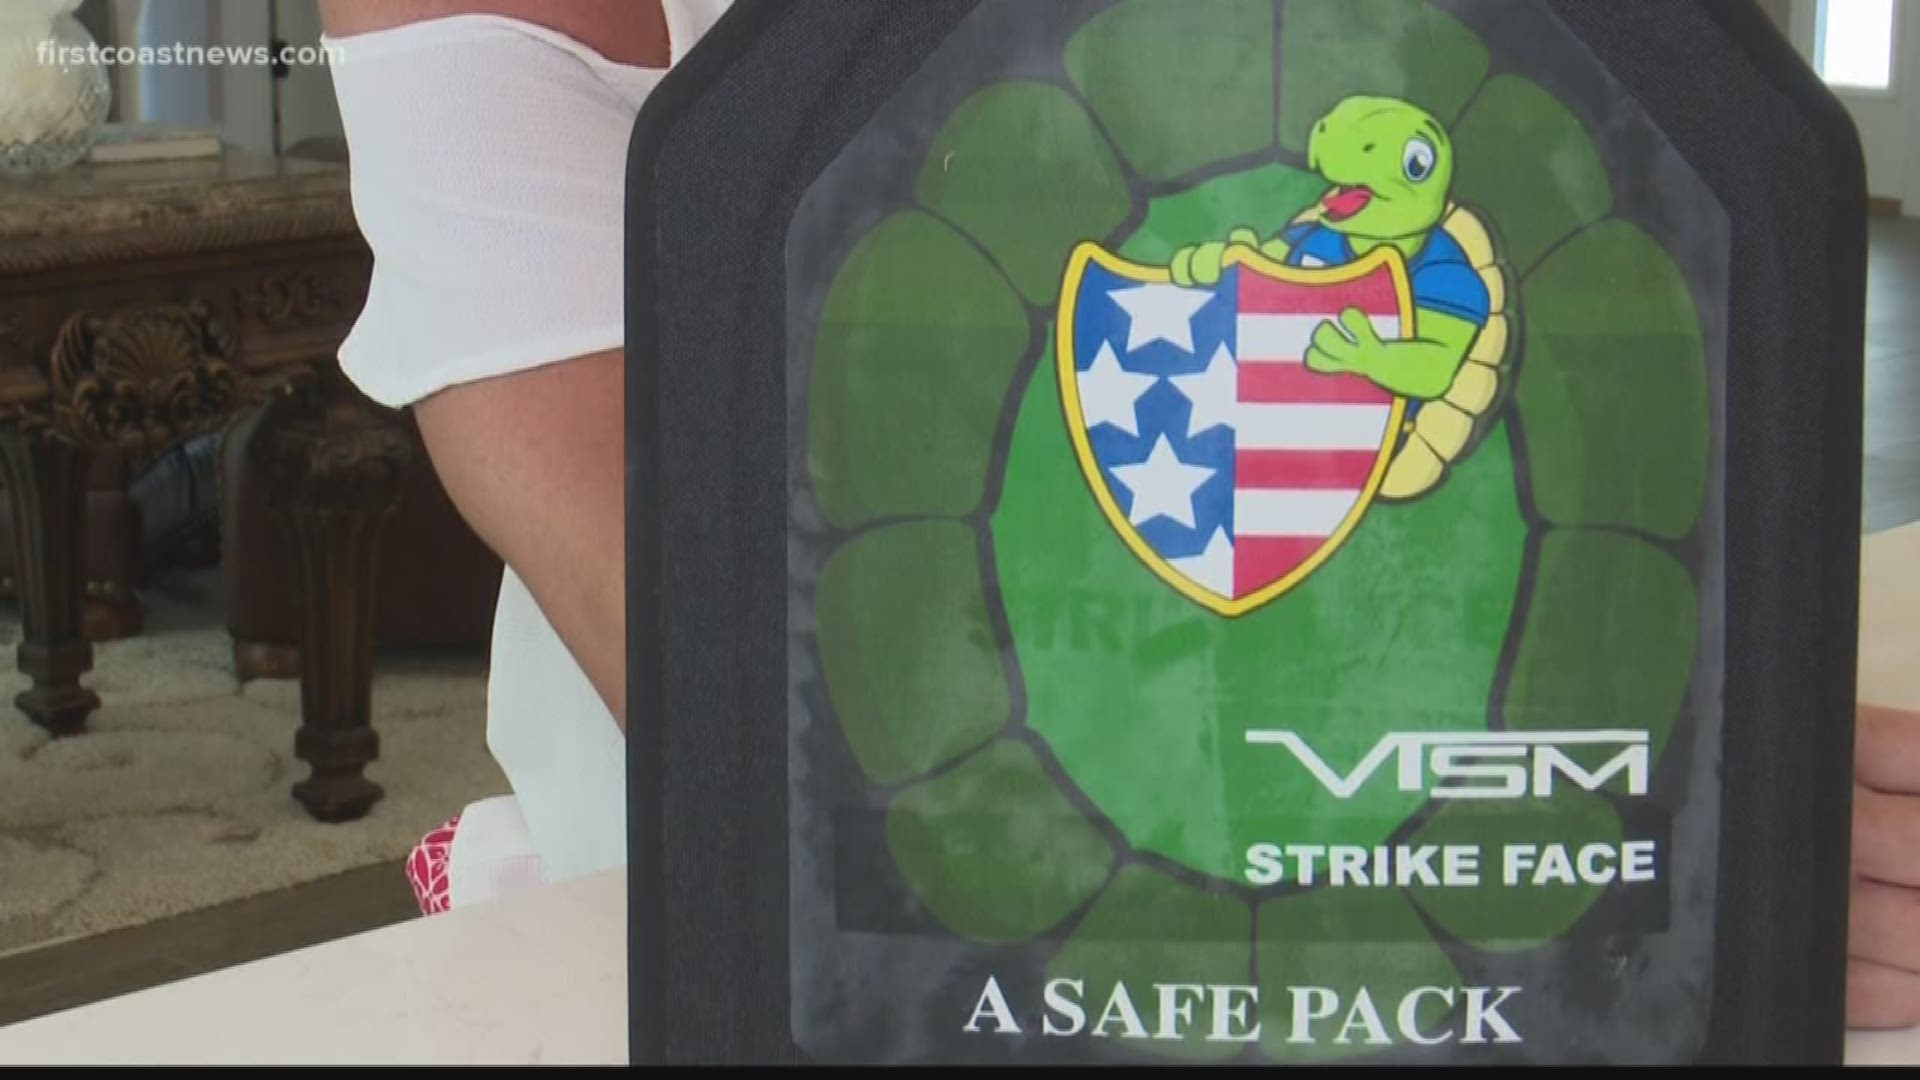 A St. Johns County mom is taking extra precautions to ensure her children's safety at school.